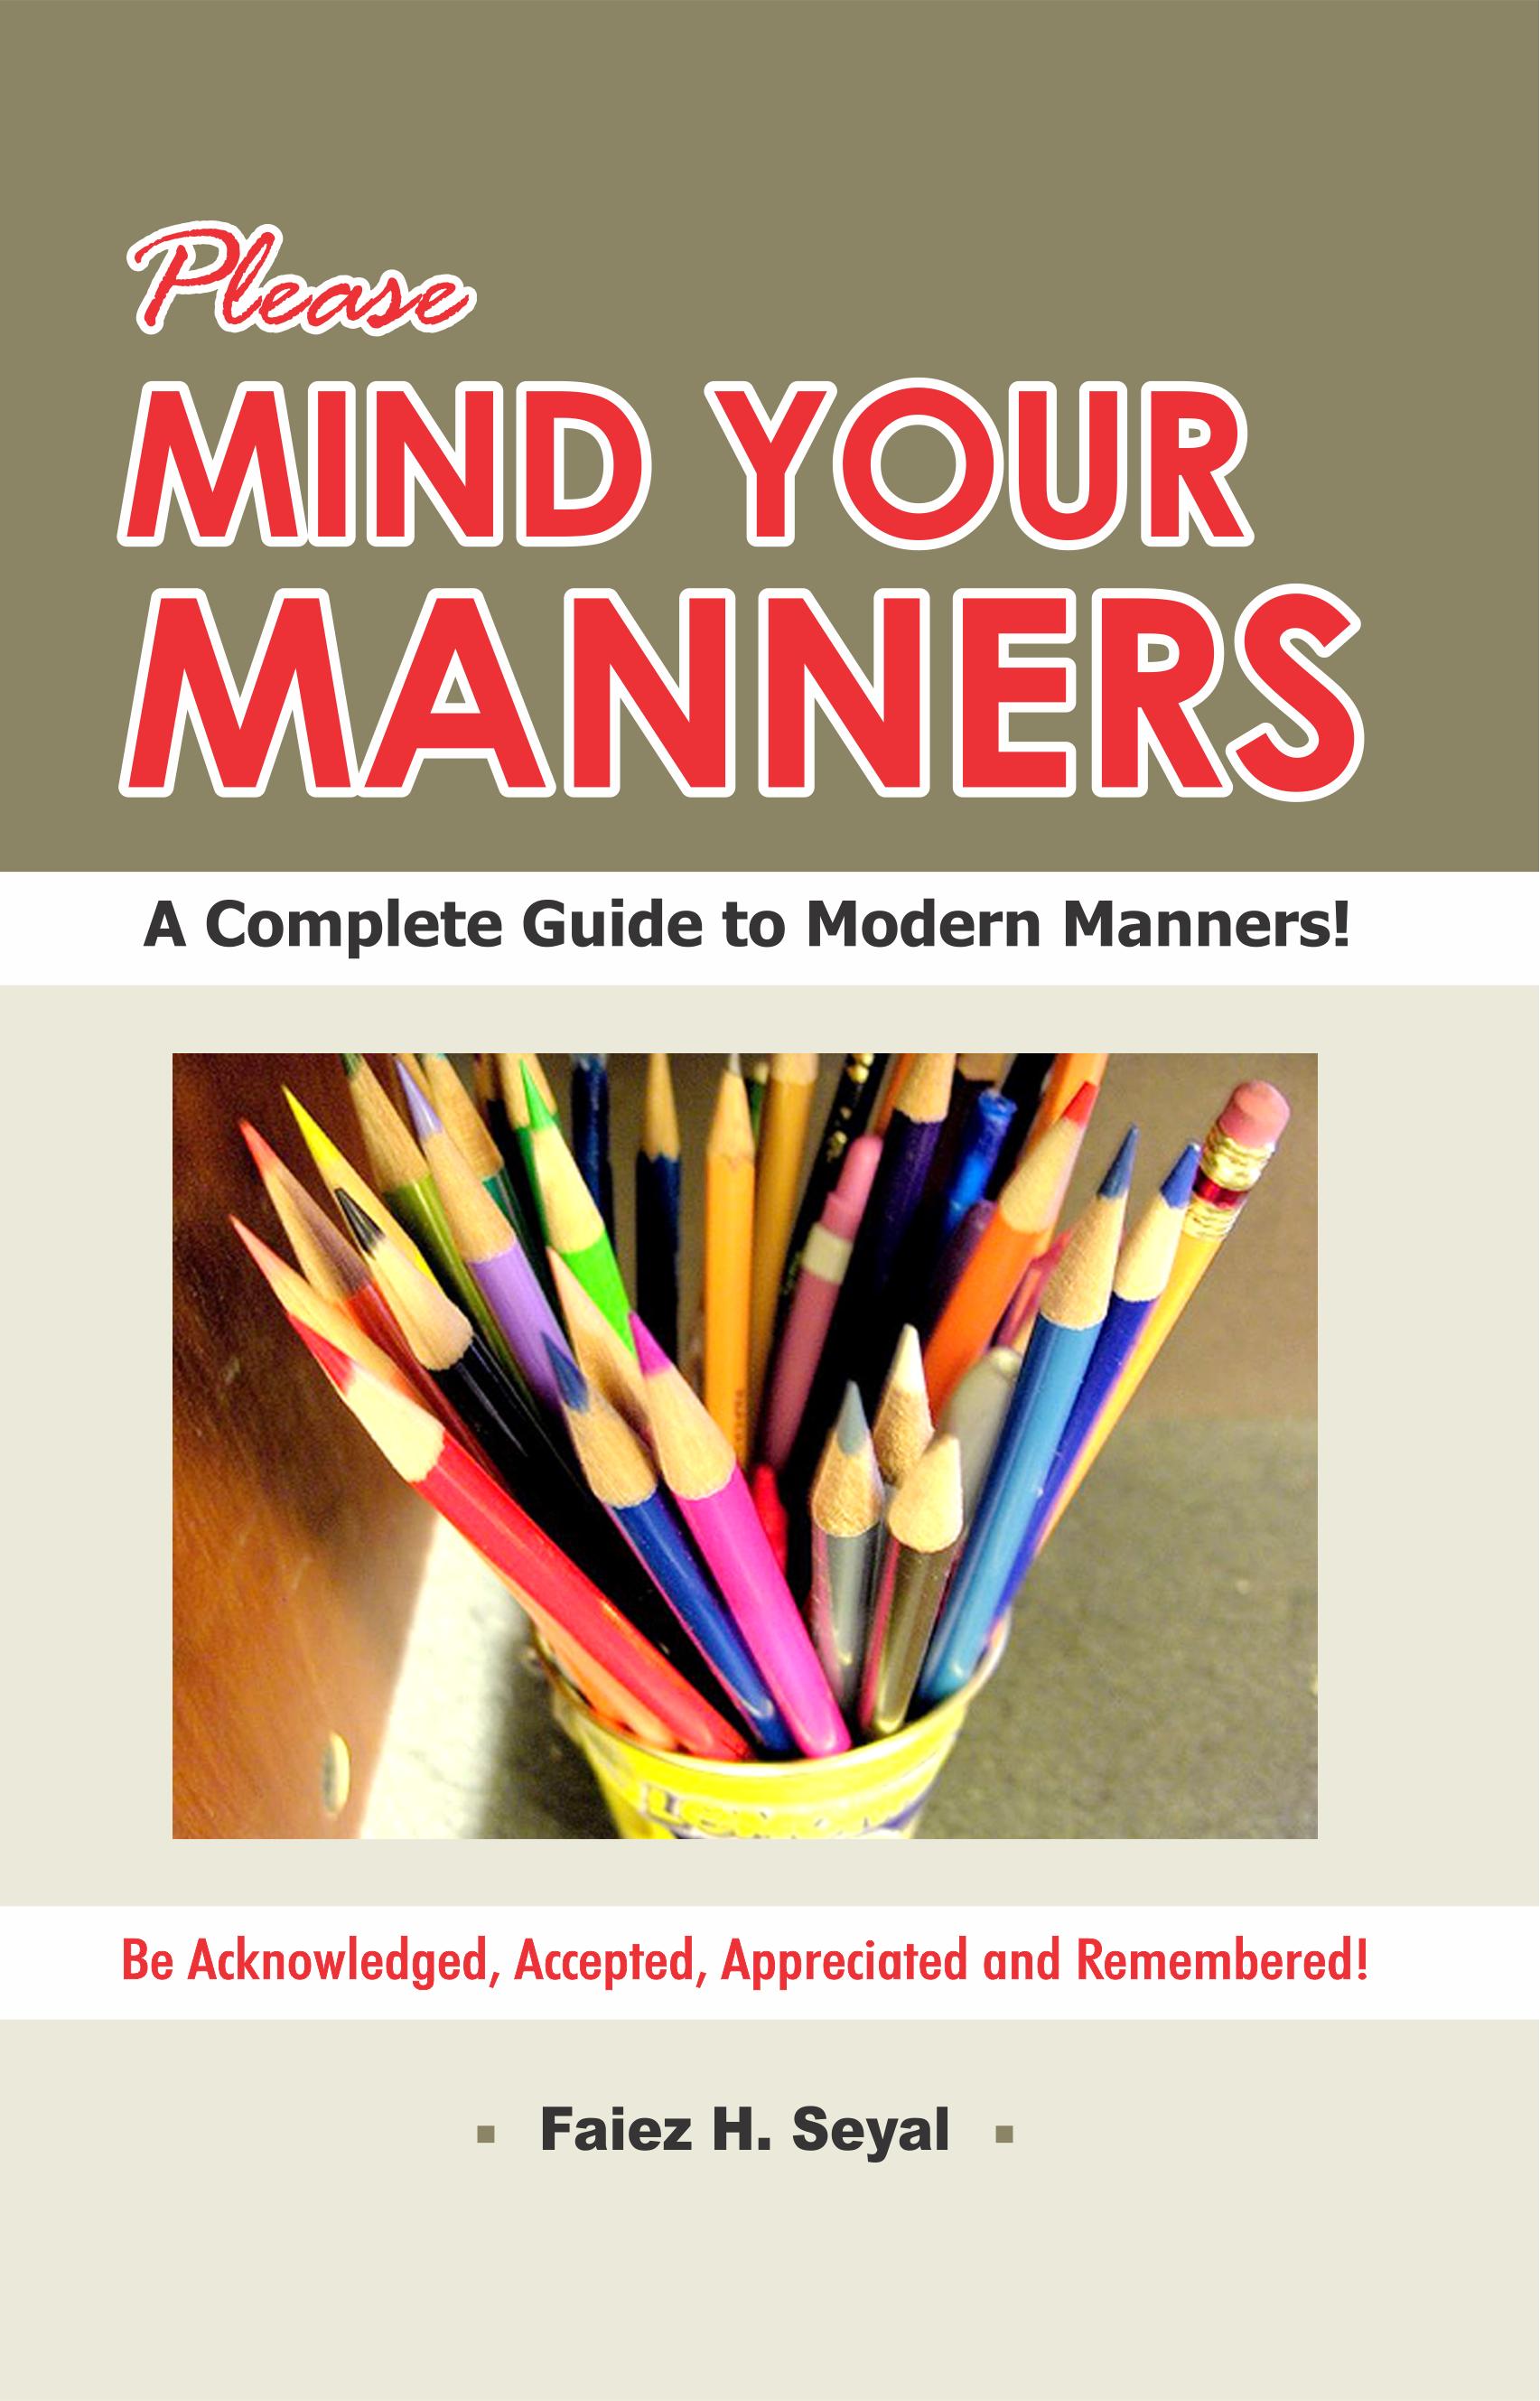 Please Mind Your Manners Book By Faiez H. Seyal